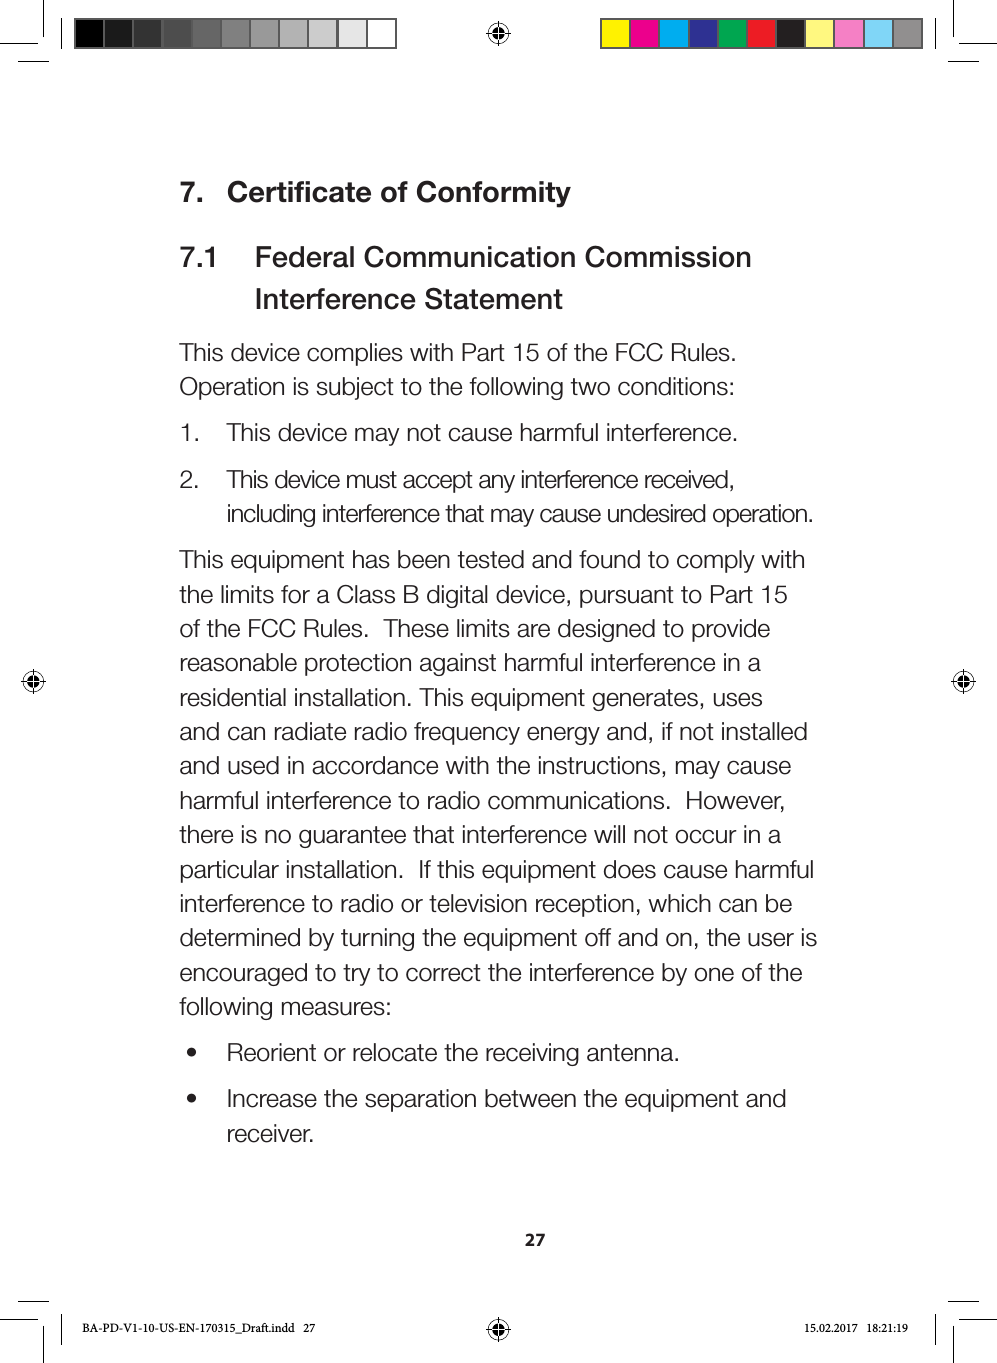 277.  Certificate of Conformity7.1   Federal Communication Commission     Interference StatementThis device complies with Part 15 of the FCC Rules. Operation is subject to the following two conditions: 1.  This device may not cause harmful interference.2.  This device must accept any interference received, including interference that may cause undesired operation.This equipment has been tested and found to comply with the limits for a Class B digital device, pursuant to Part 15 of the FCC Rules.  These limits are designed to provide reasonable protection against harmful interference in a residential installation. This equipment generates, uses and can radiate radio frequency energy and, if not installed and used in accordance with the instructions, may cause harmful interference to radio communications.  However, there is no guarantee that interference will not occur in a particular installation.  If this equipment does cause harmful interference to radio or television reception, which can be determined by turning the equipment off and on, the user is encouraged to try to correct the interference by one of the following measures:•  Reorient or relocate the receiving antenna.•  Increase the separation between the equipment and receiver.BA-PD-V1-10-US-EN-170315_Draft.indd   27 15.02.2017   18:21:19